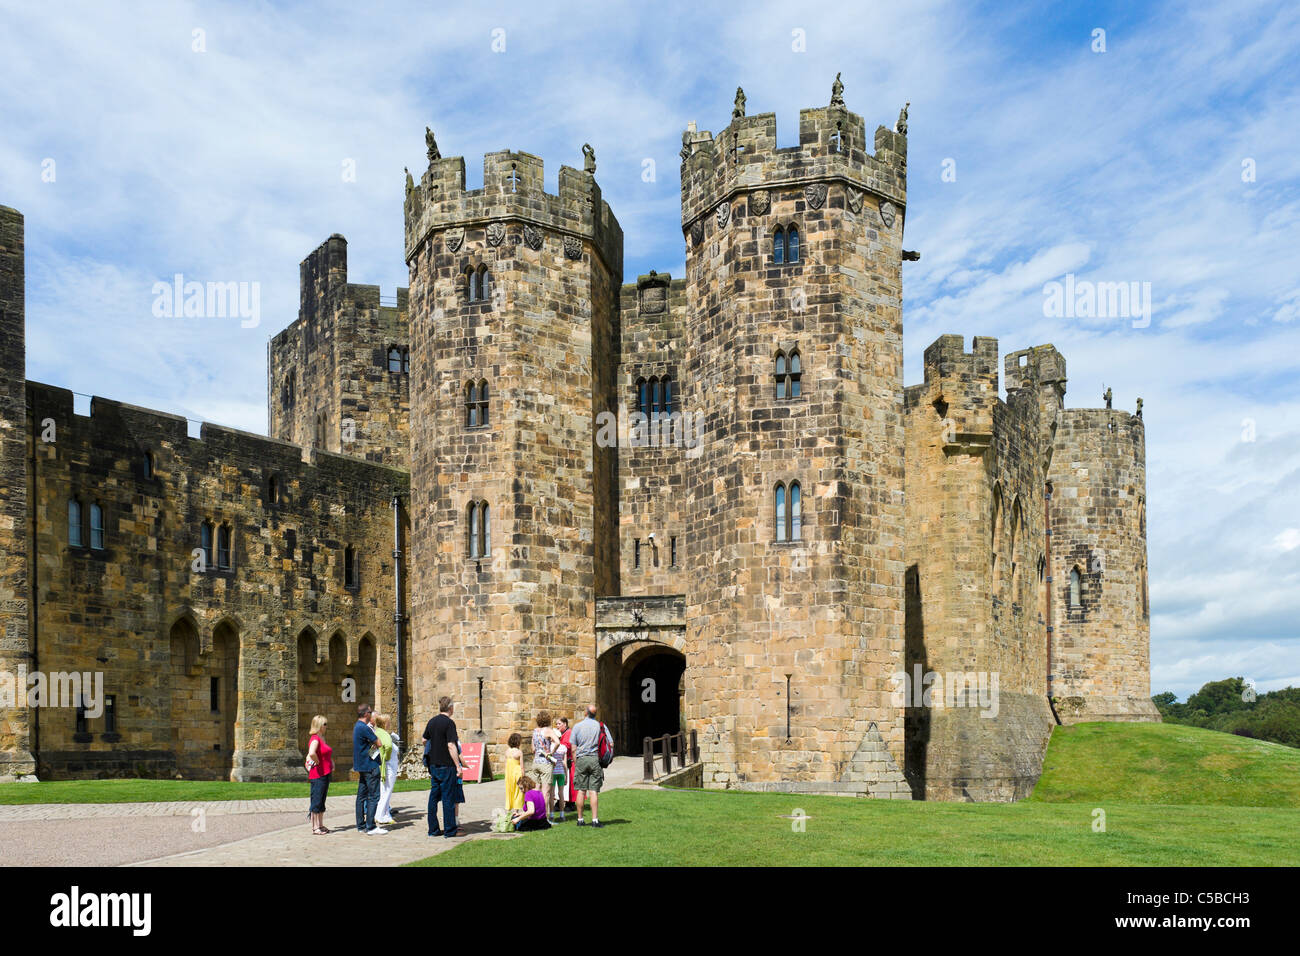 Alnwick Castle (used as location for Hogwarts School in the Harry Potter films), Alnwick, Northumberland, North East England, UK Stock Photo